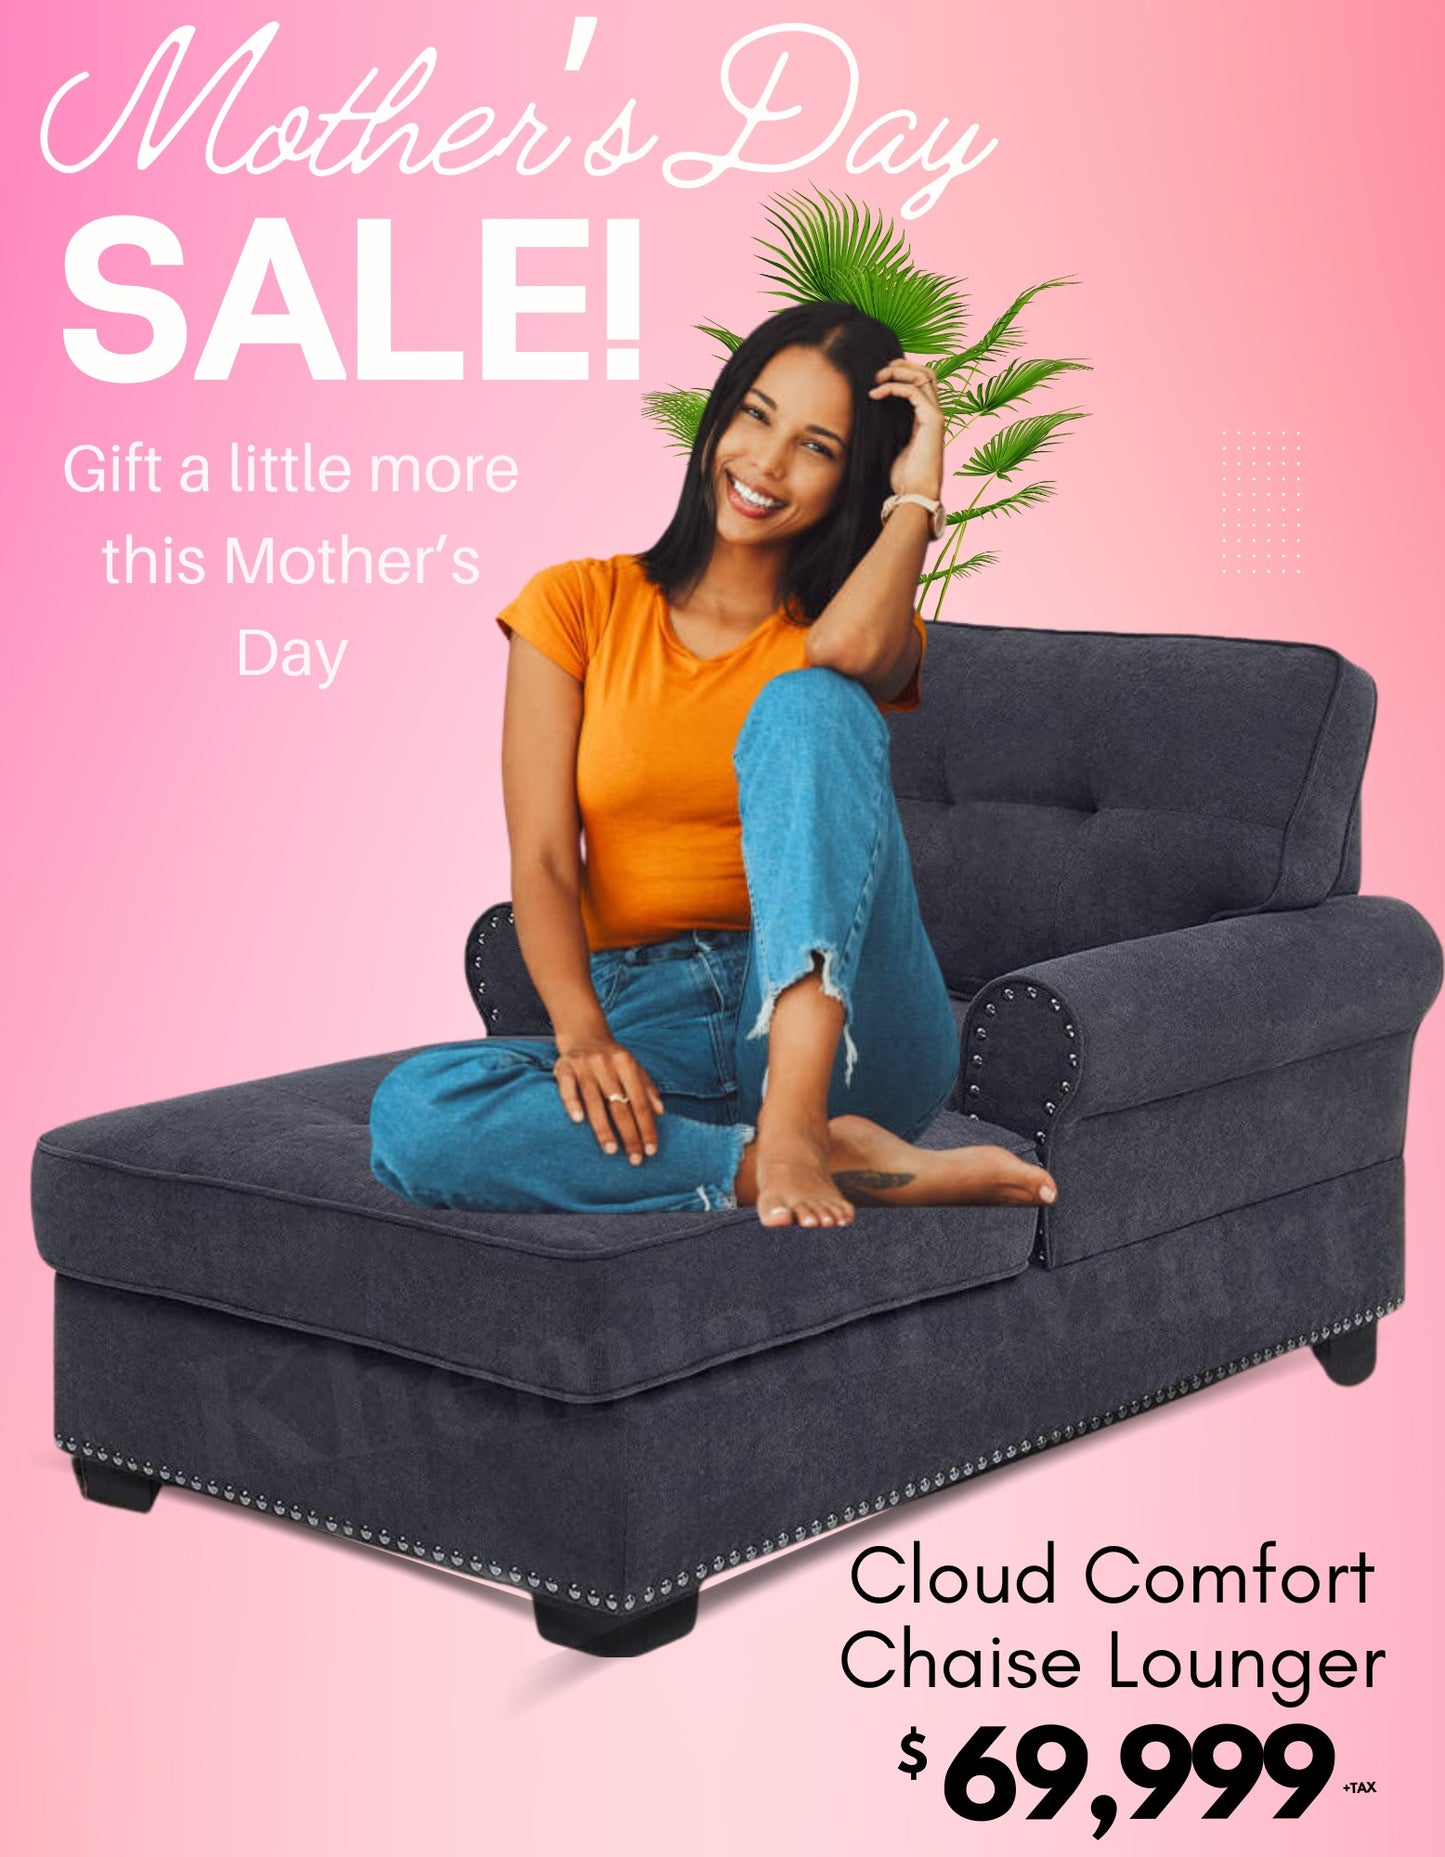 Cloud Comfort Chaise Lounger